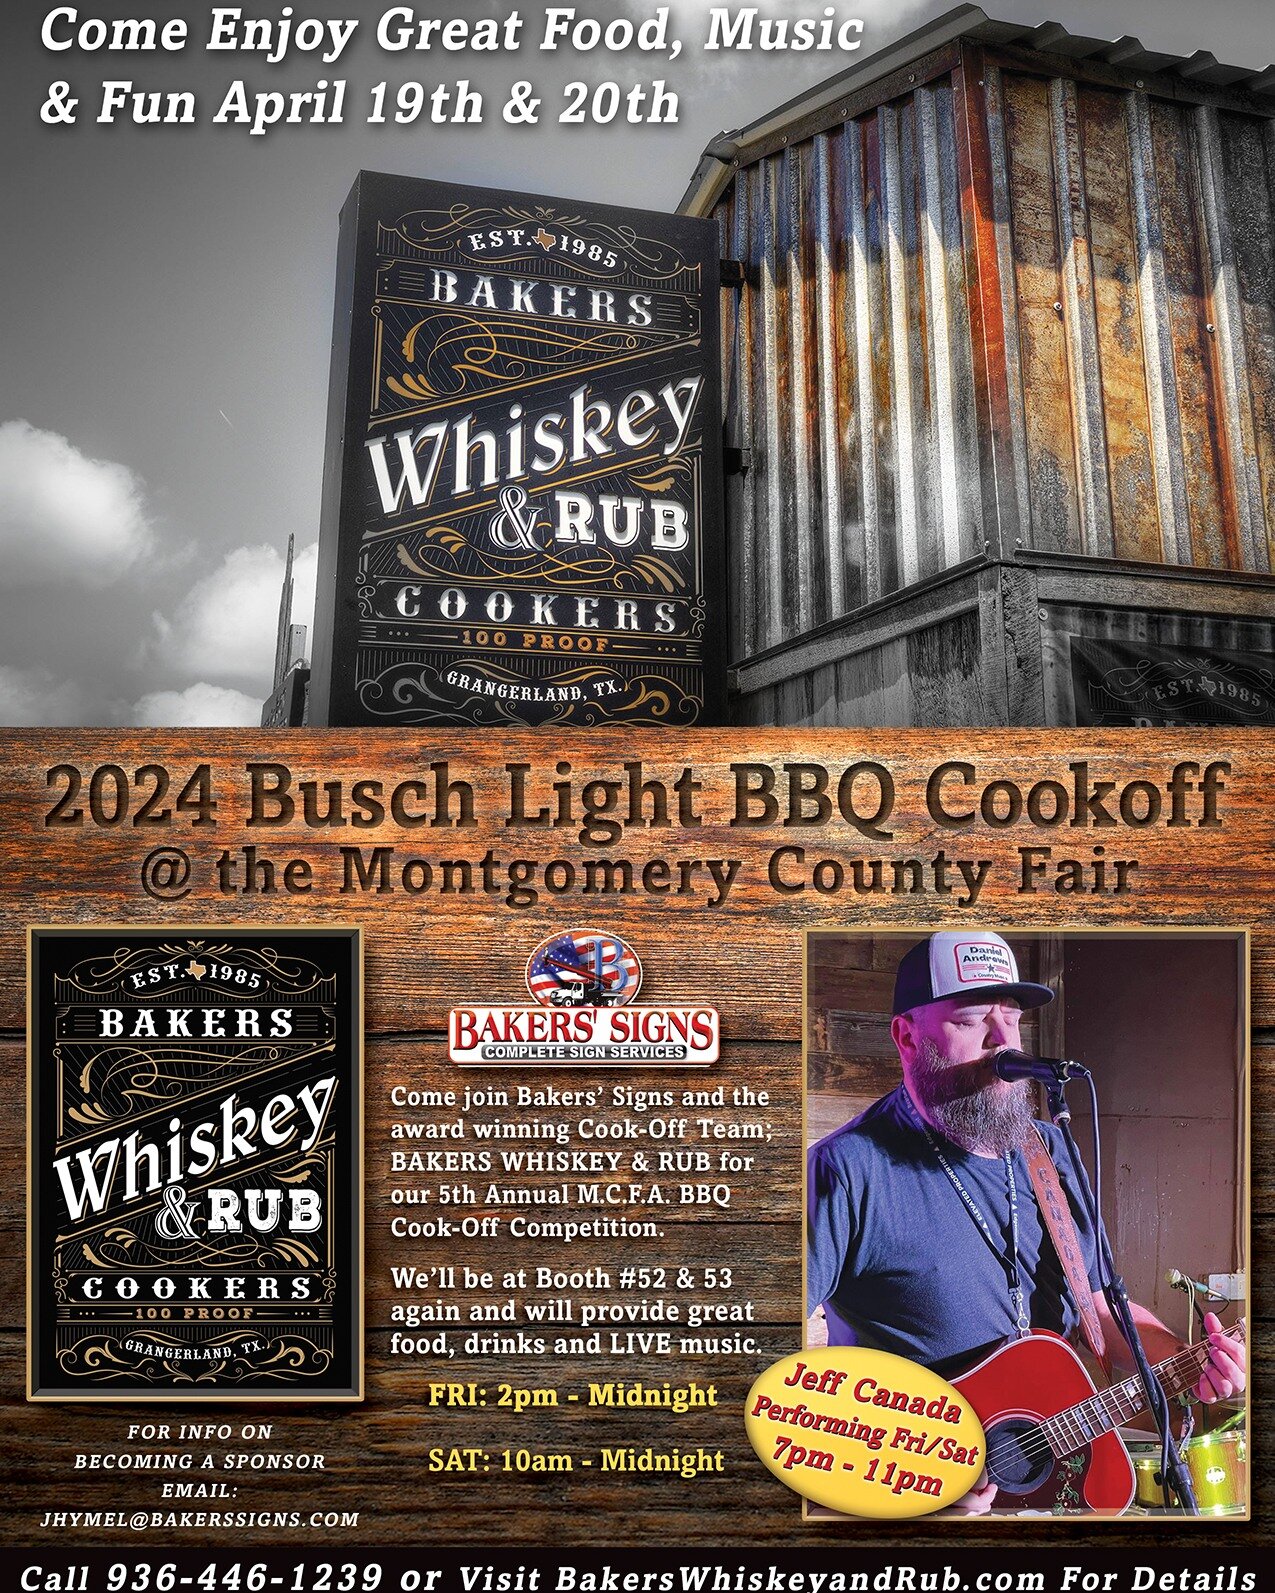 🎶🍖 Get Ready for a Flavorful Experience at the Montgomery County Cook Off! 🌟

Join us at the Bakers Whiskey &amp; Rub tent (#52/53) for a sizzling good time! 🔥

🎵 Live Music by Jeff Canada
🍹 Savory BBQ Delights
🎉 Fun Games &amp; Prizes

March 